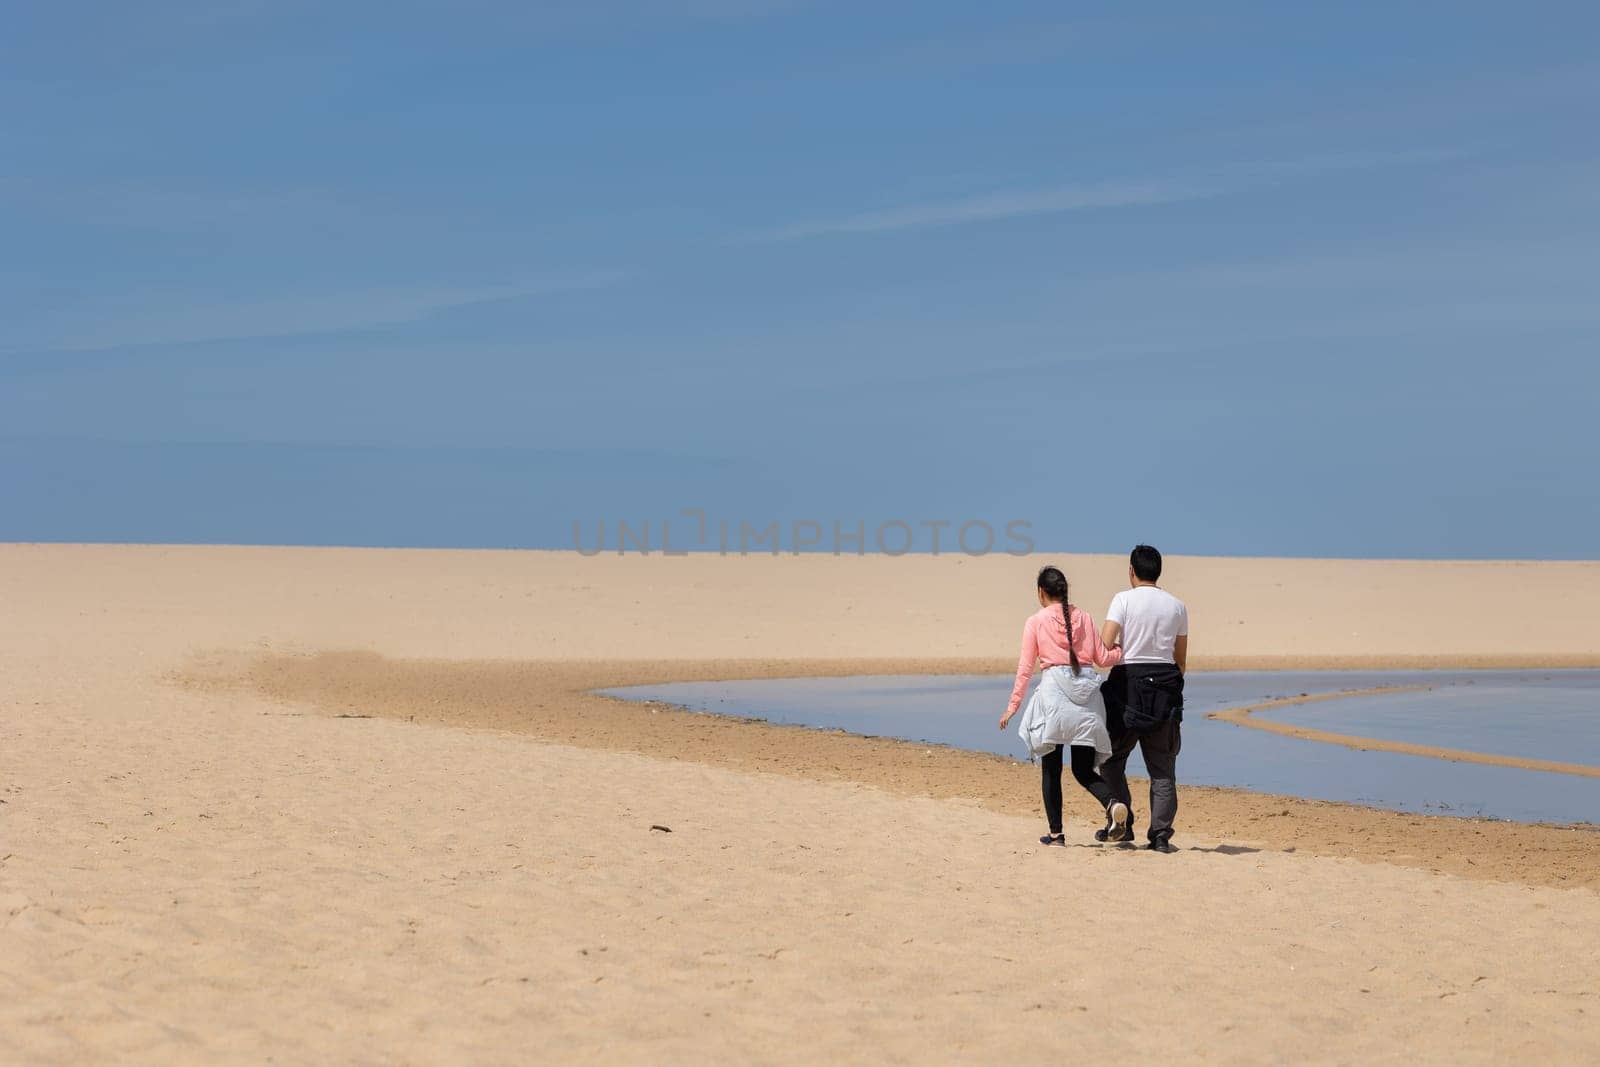 A couple walking on a beach with a clear blue sky above them by Studia72